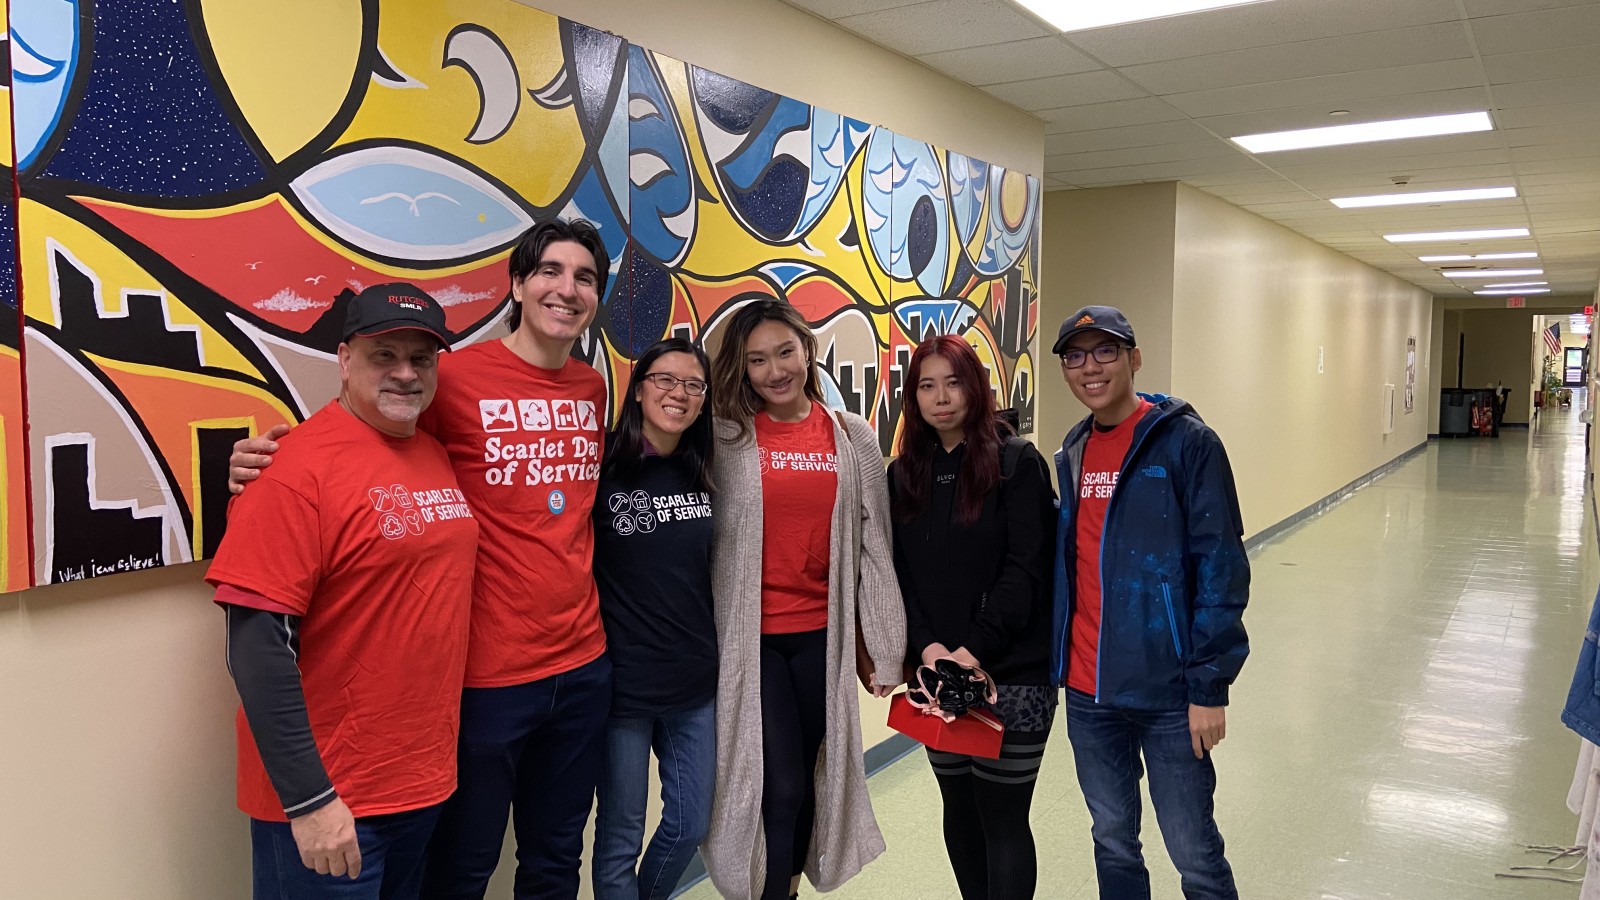 Image of SMLR Alumni Association at Rutgers Scarlet Day of Service